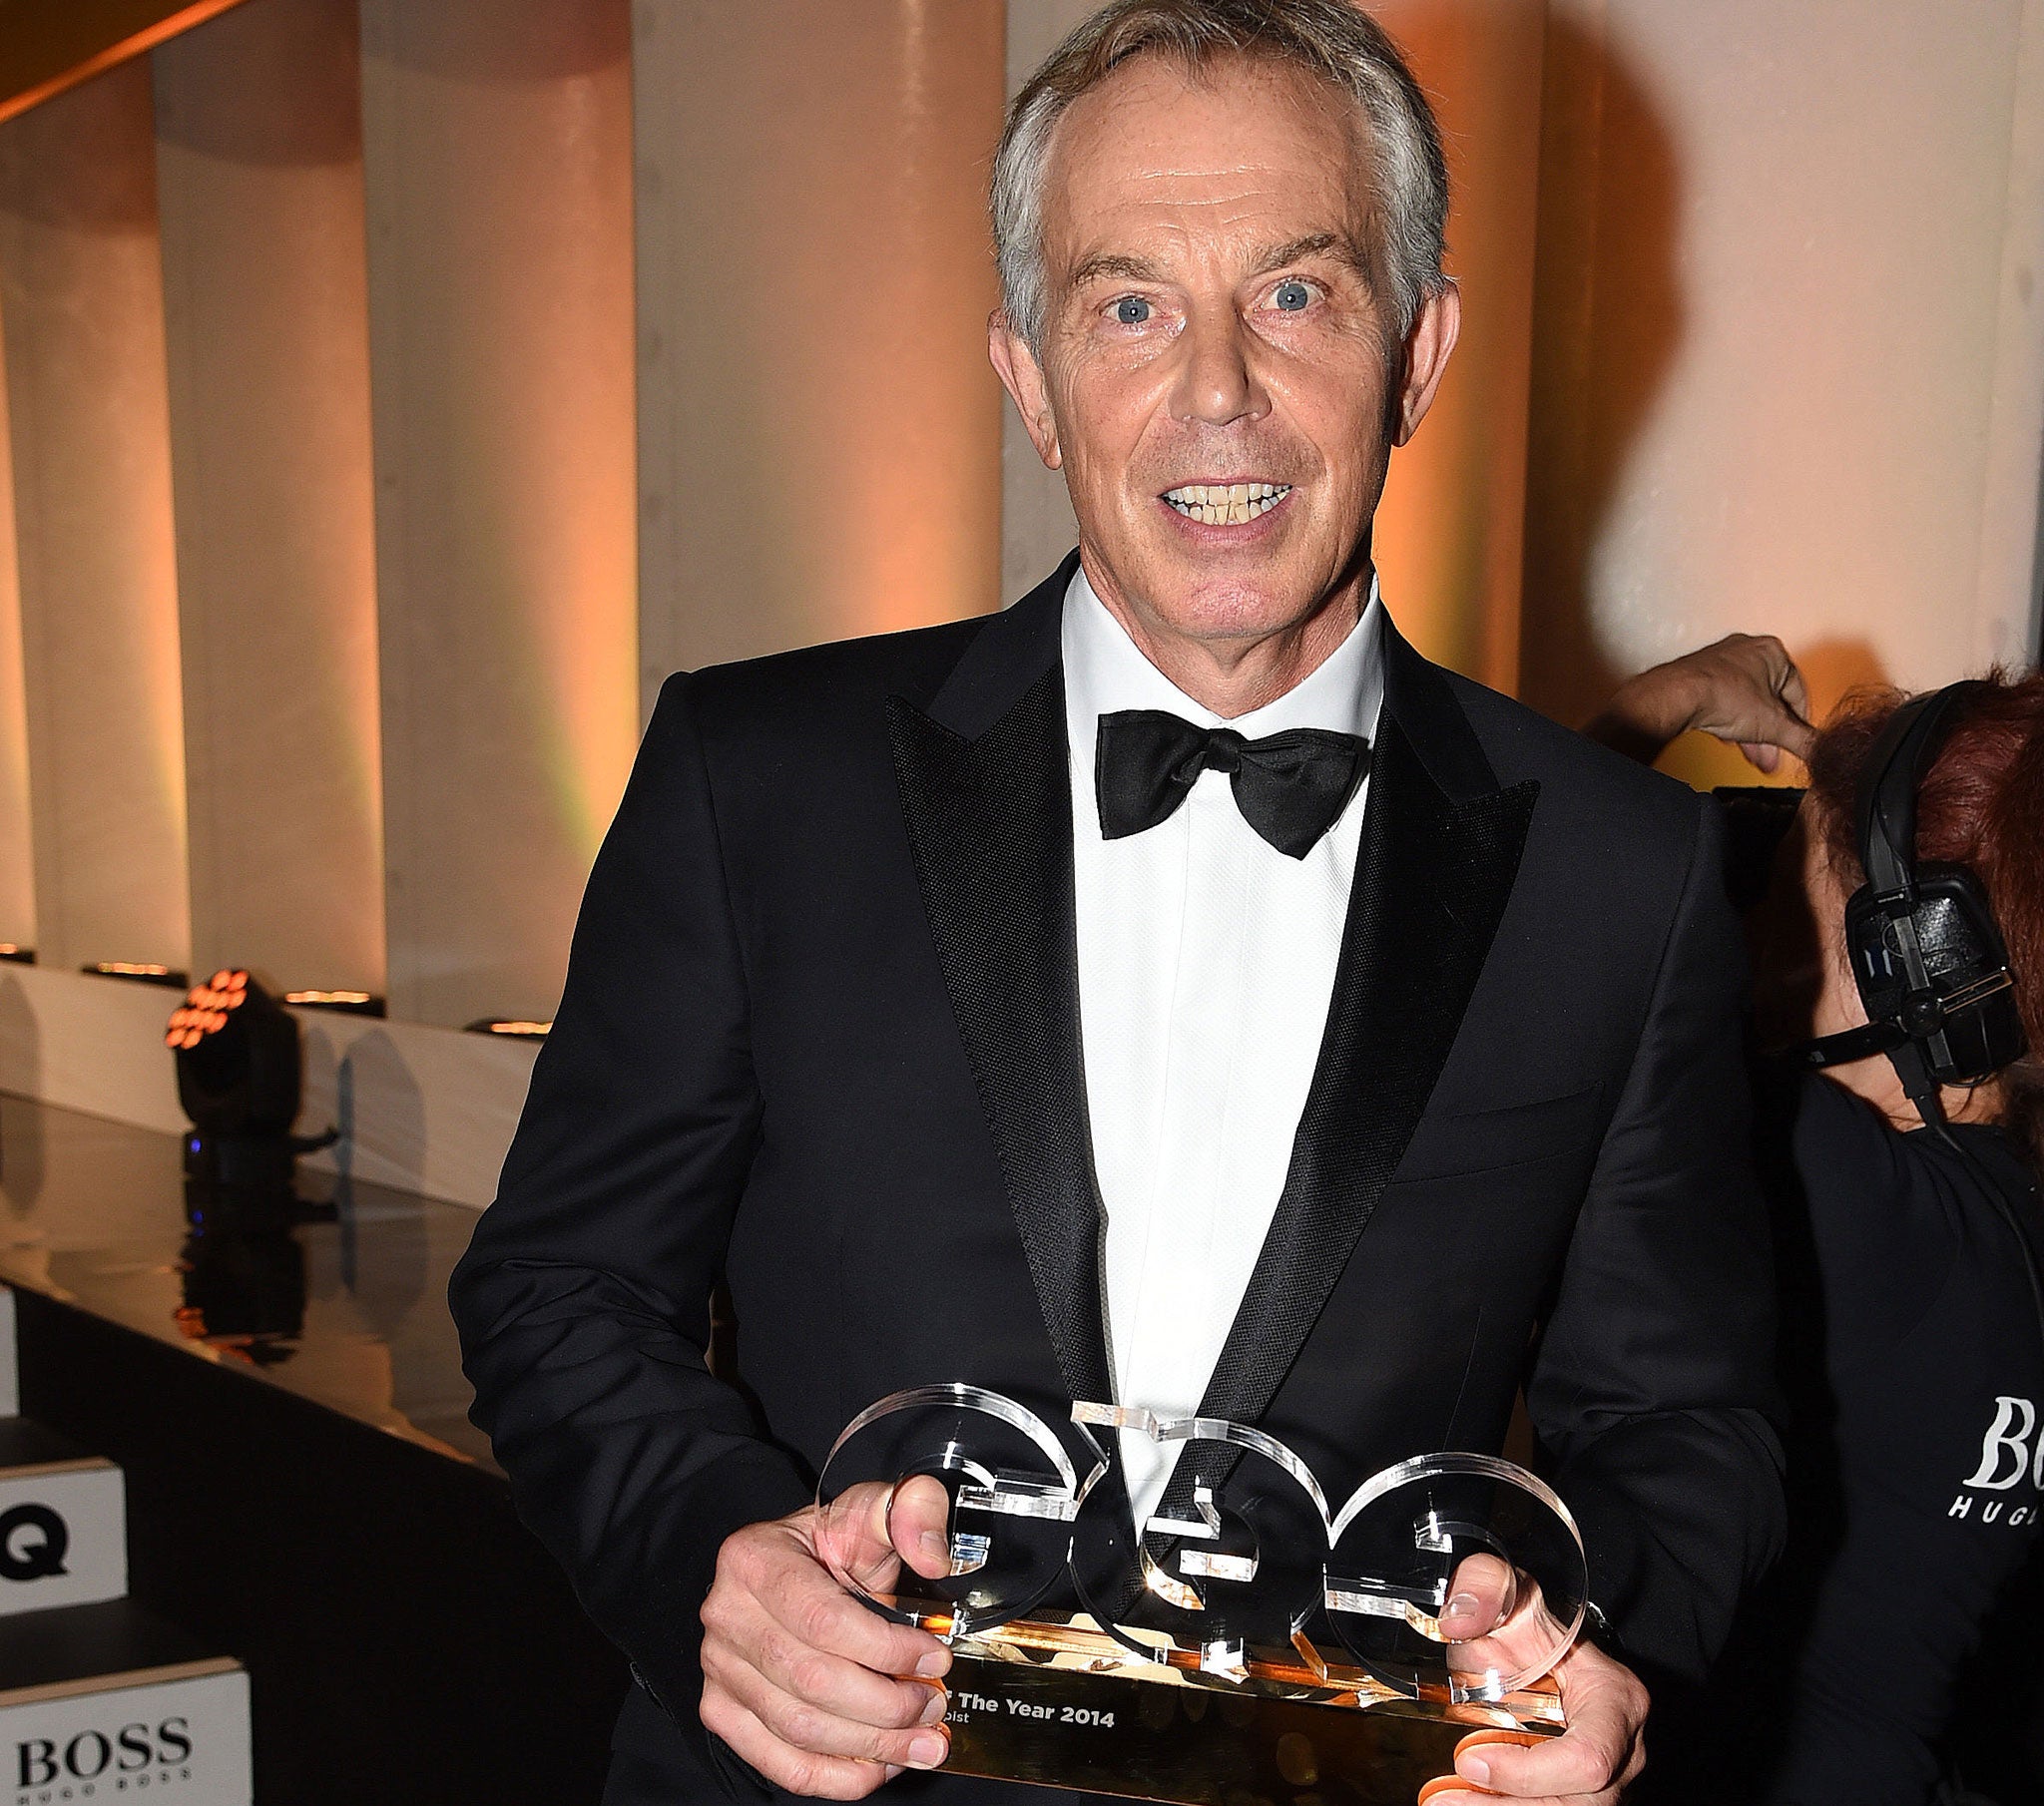 Tony Blair Philanthropist of the Year award defended by GQ The Independent The Independent picture